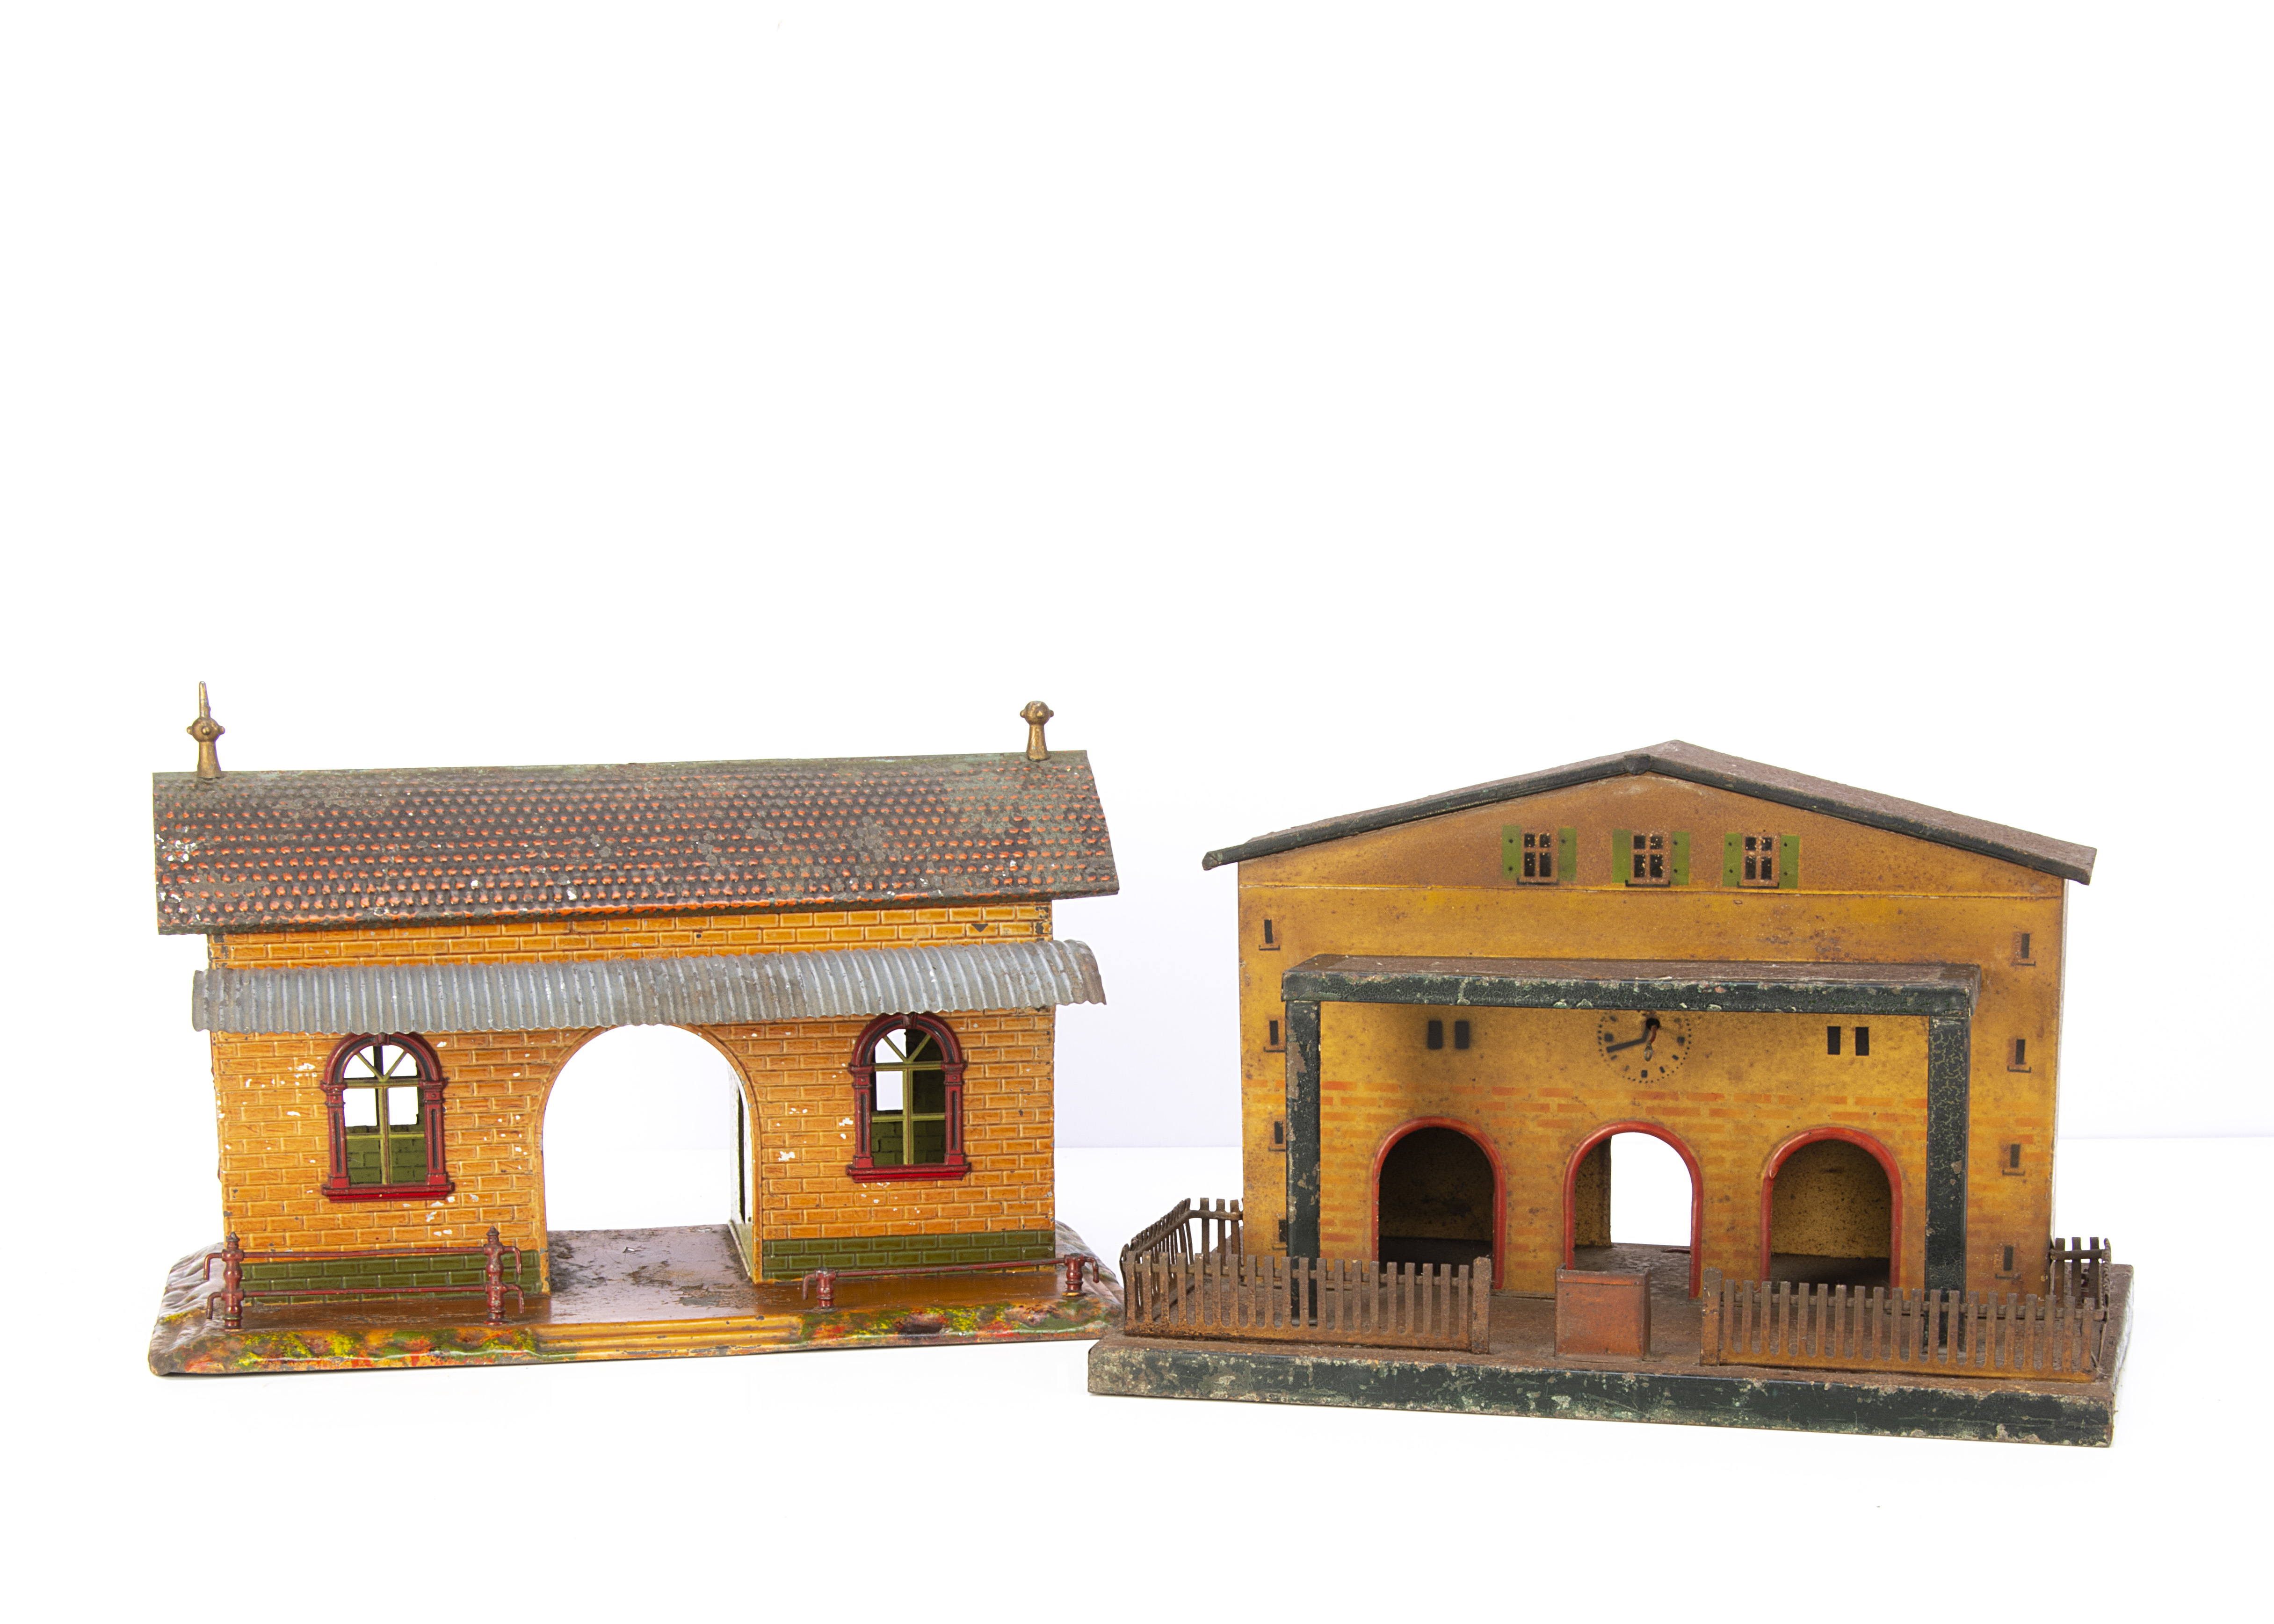 Vintage large-scale Stations by Bing and Kibri, the Bing station with detachable corrugated canopy